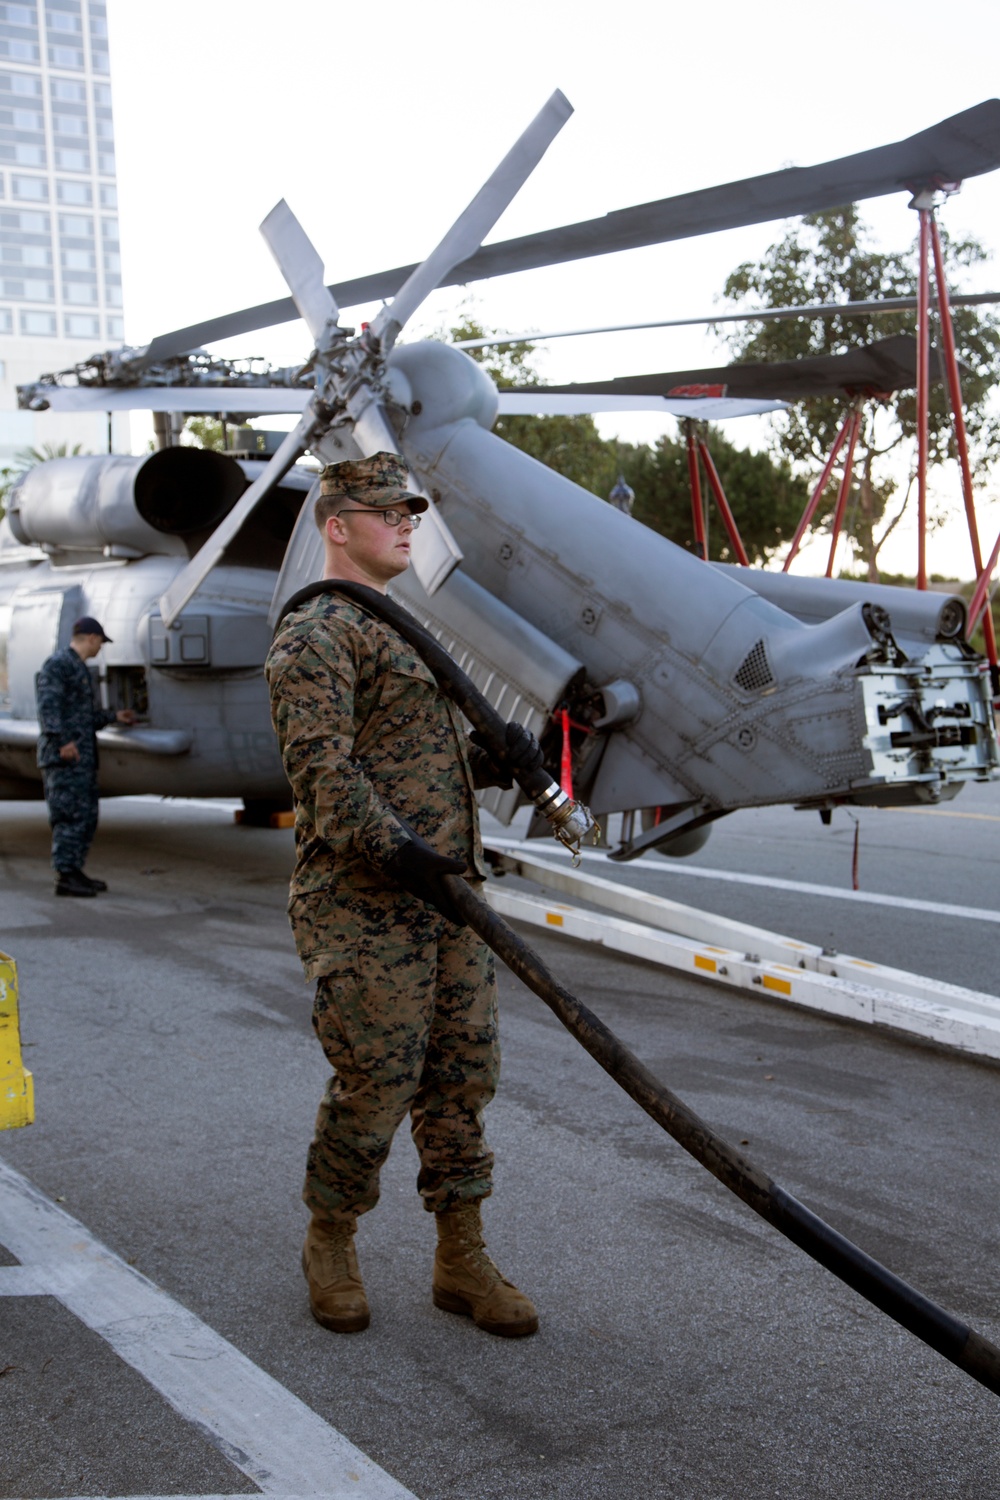 MWSS-372 Defuels Aircraft for Display